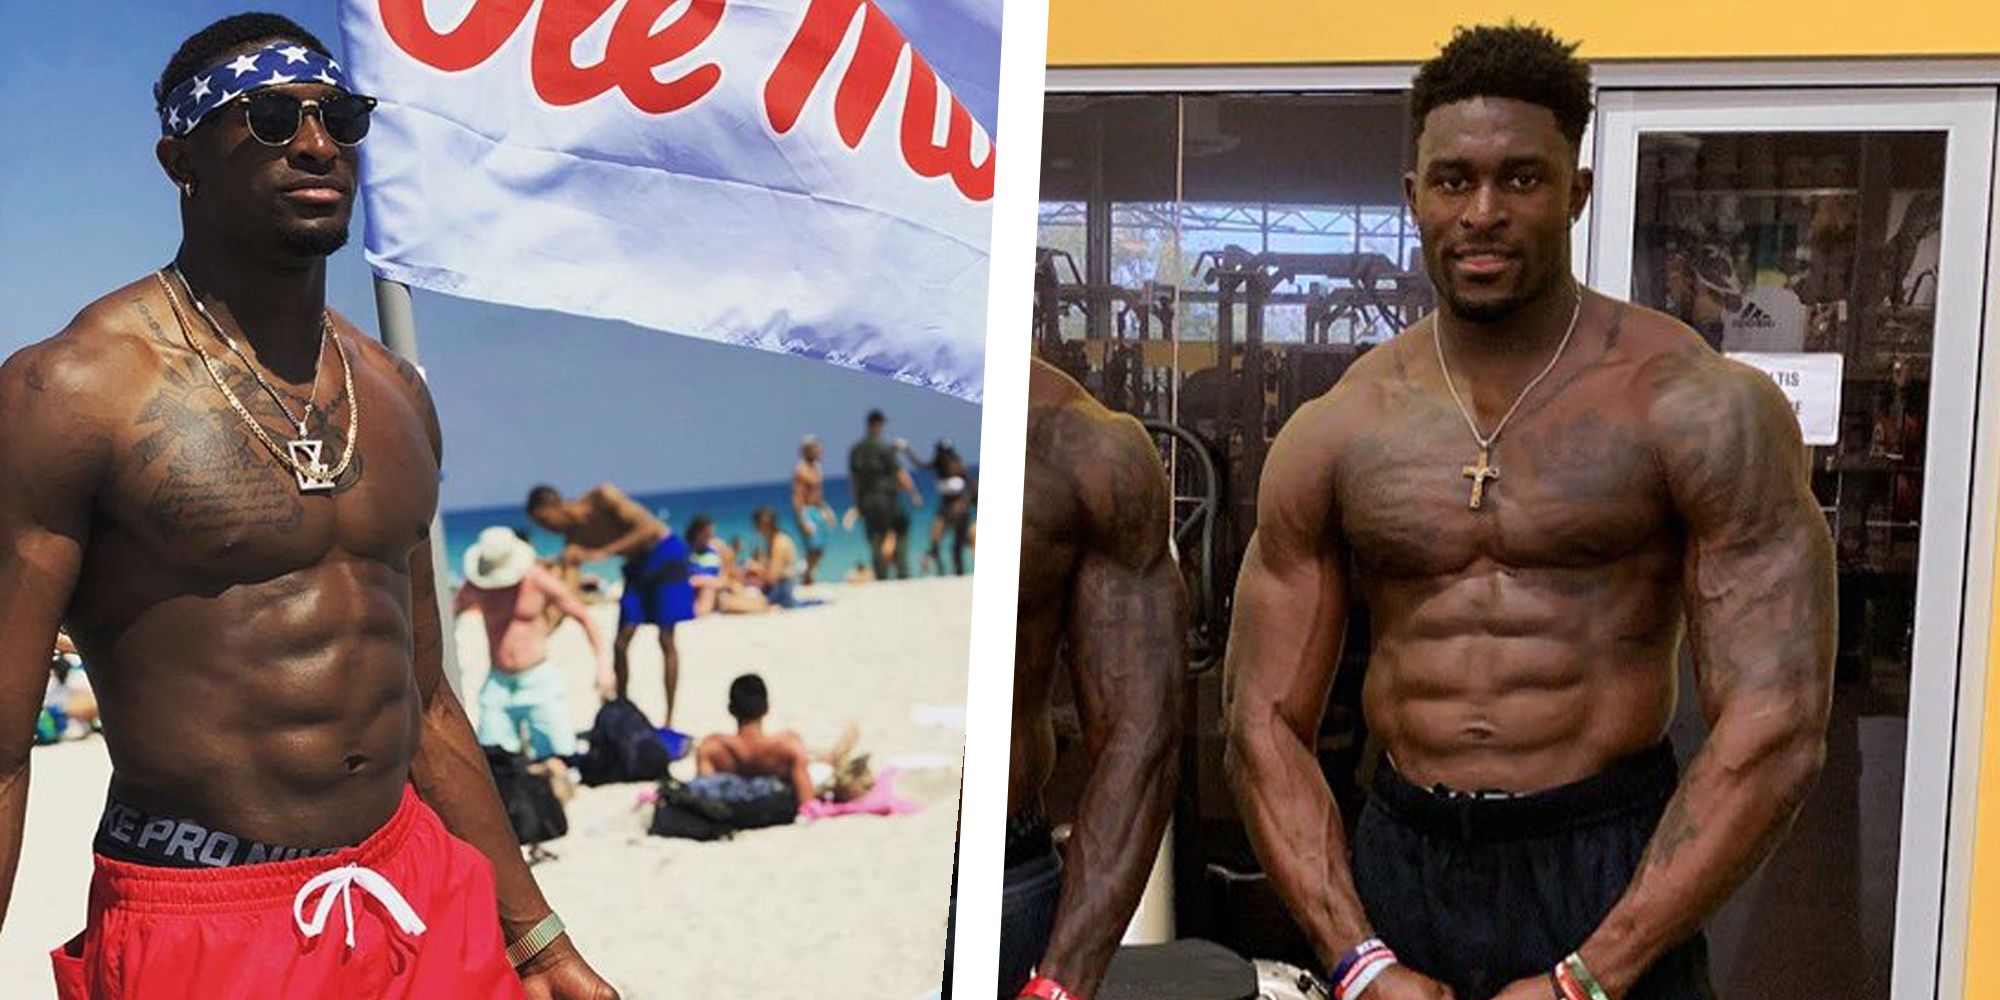 This American Football Player Has 1.9% Body Fat, But Is it Healthy?